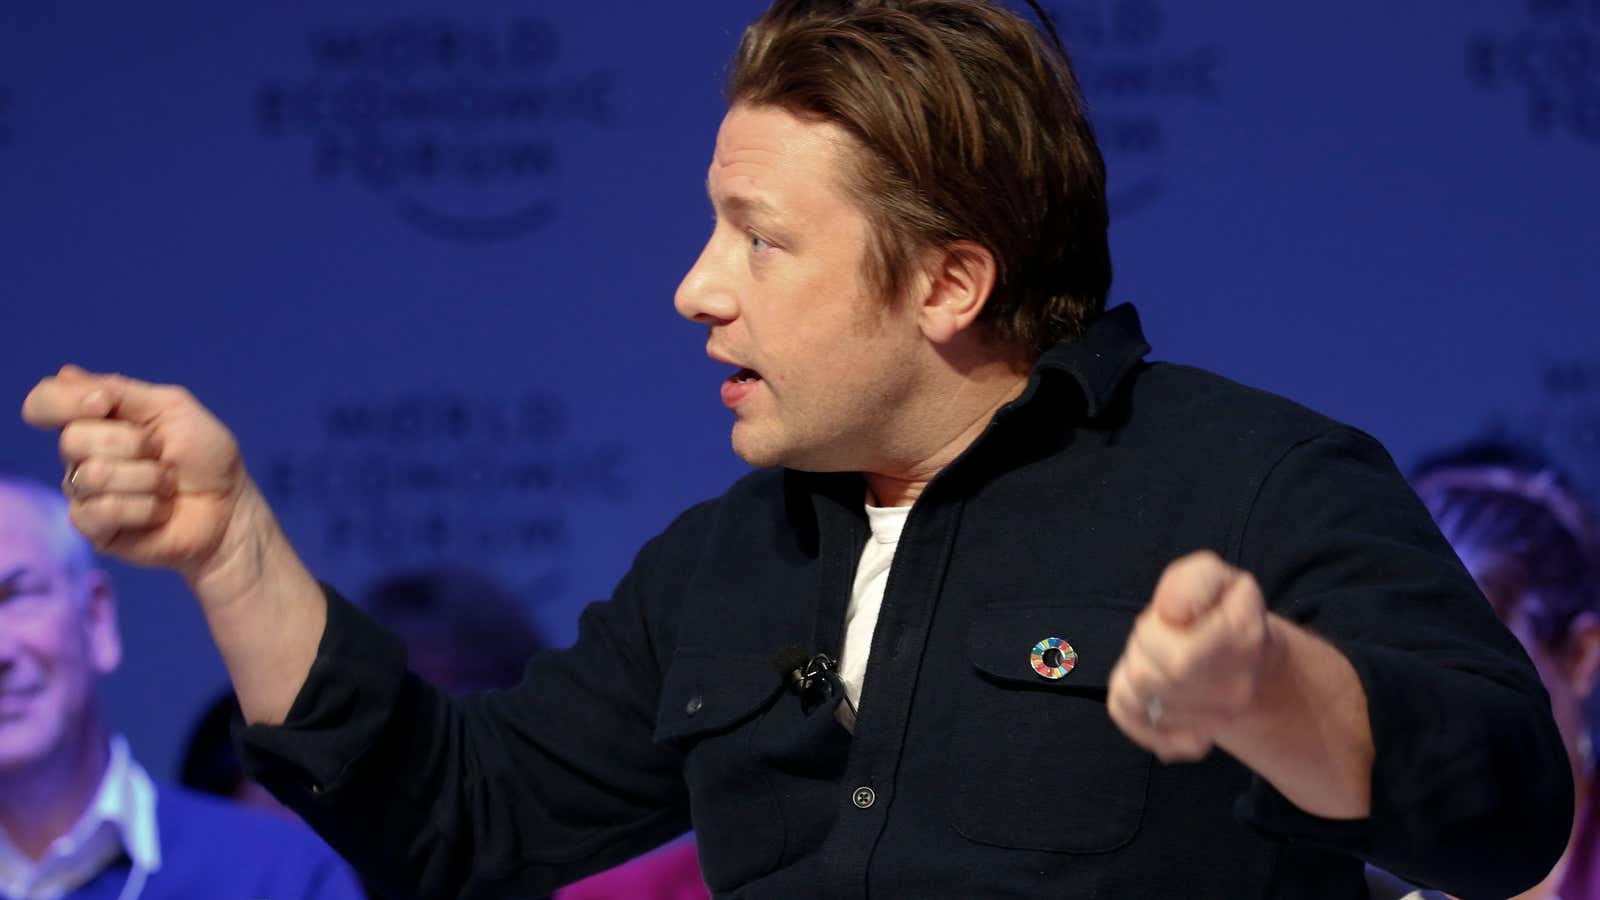 Does the criticism affect me? Yes, massively': Jamie Oliver's war on  childhood obesity, Jamie Oliver